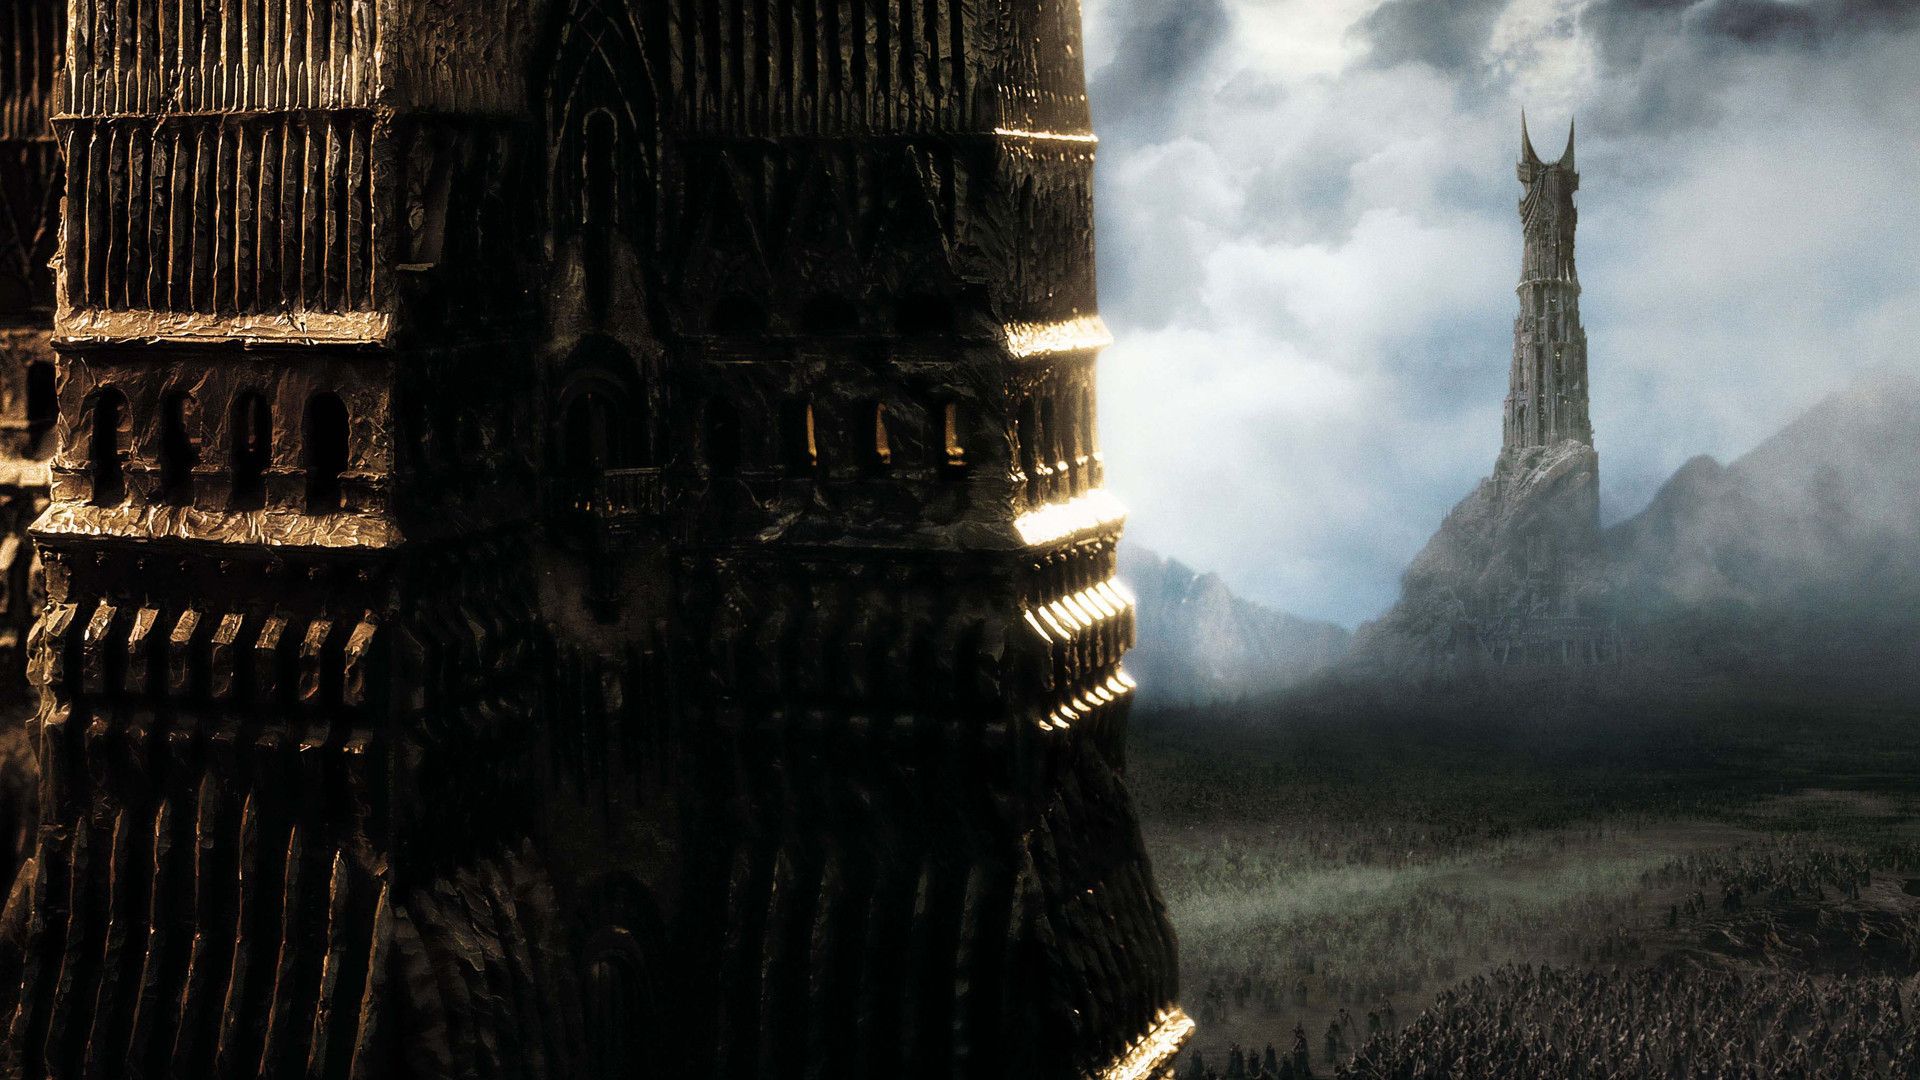 The Lord of the Rings: The Two Towers background